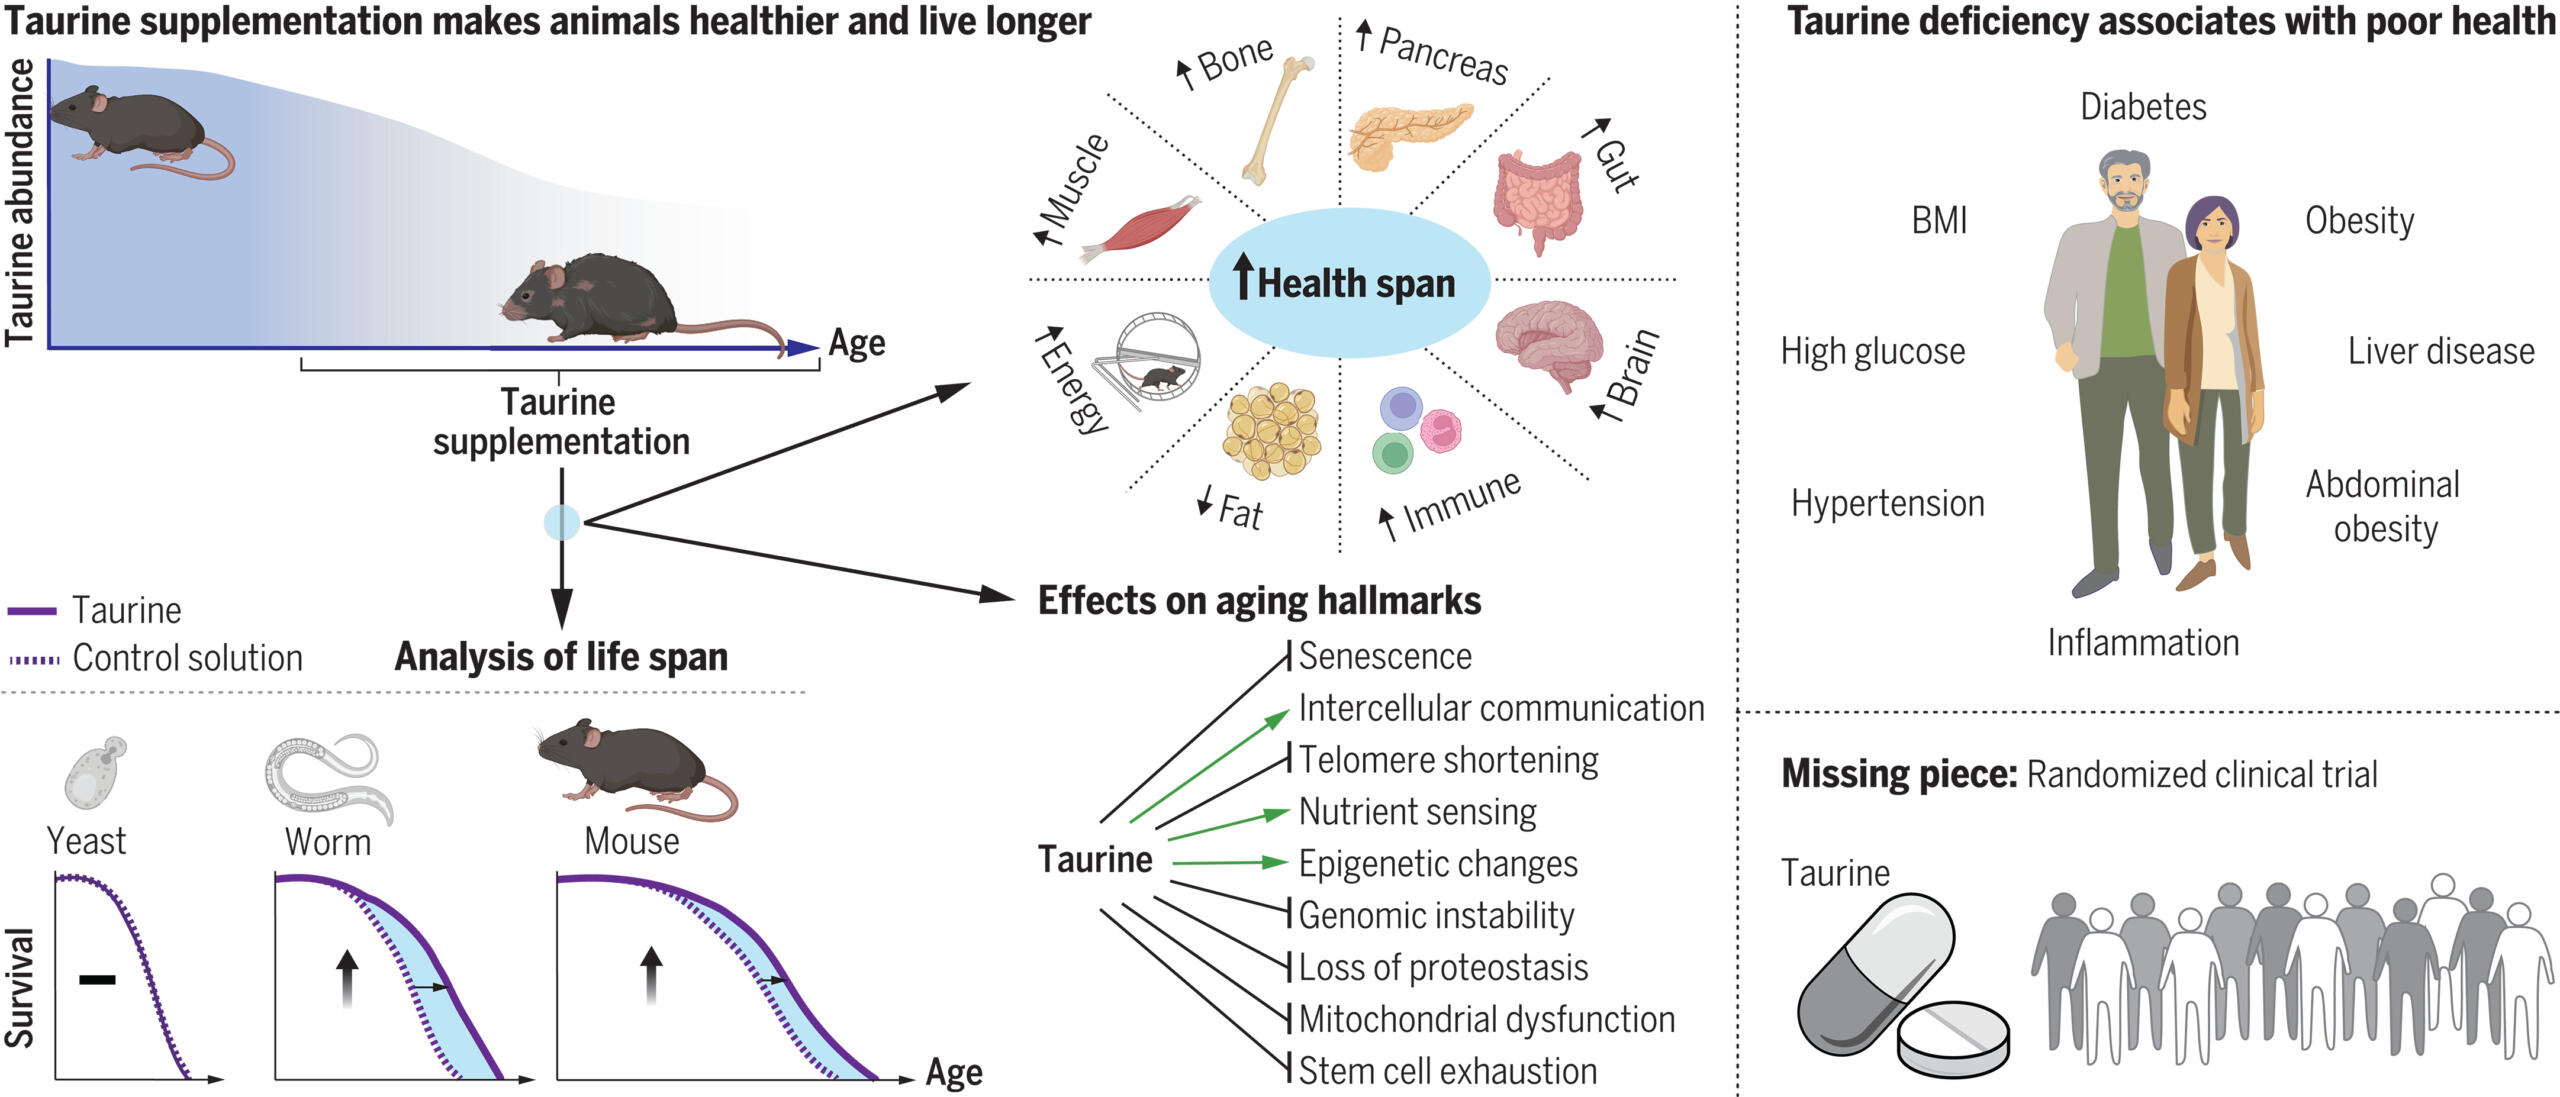 Overview of the study performed by Singh et al. to determine whether taurine deficiency is a driver of aging.